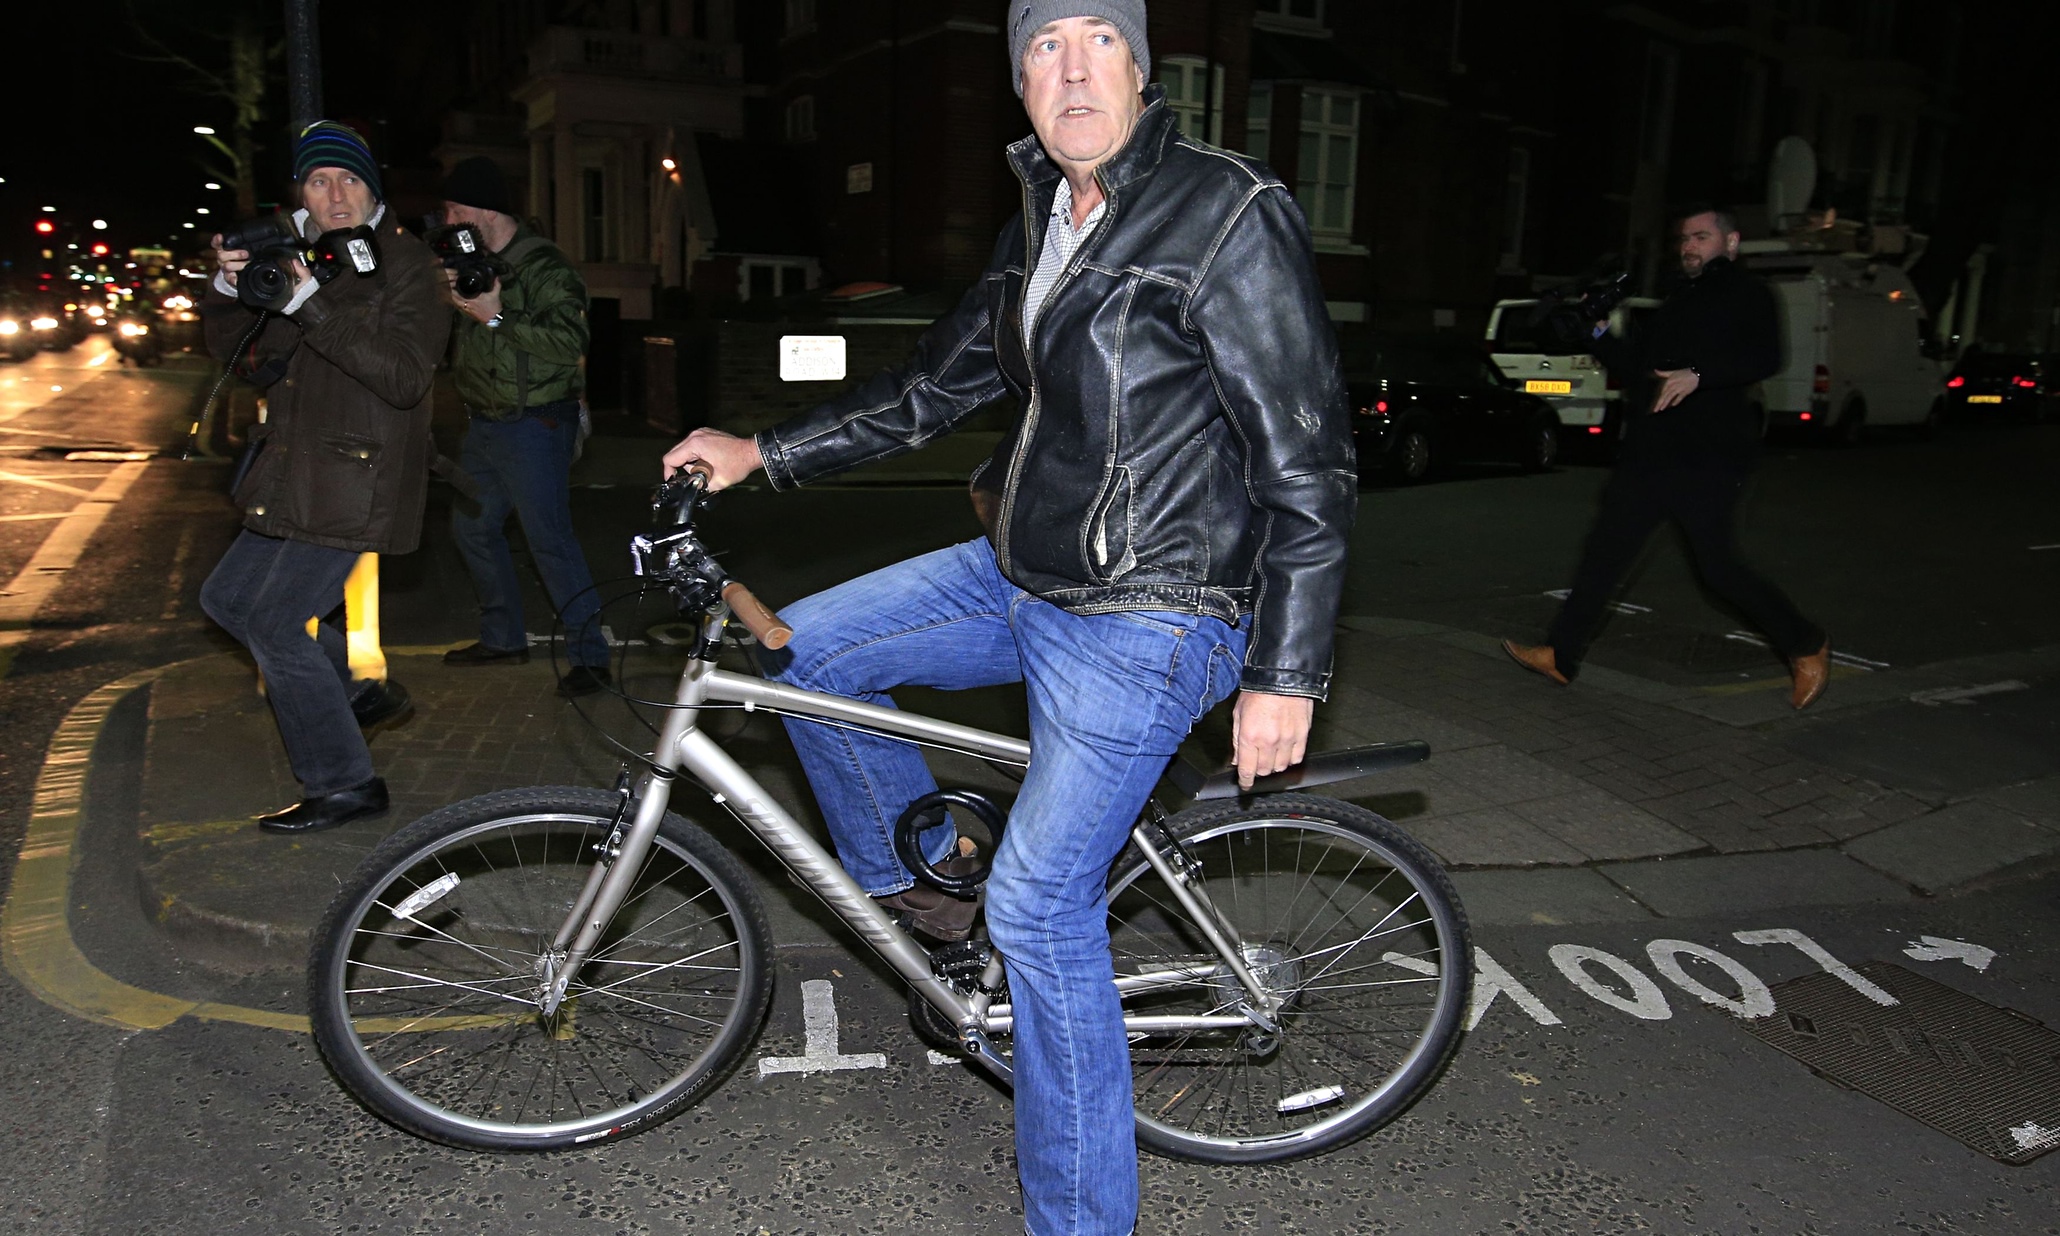 Jeremy Clarkson, pictured on his bicycle tonight, after hearing the BBC is not going to renew his Top Gear contract.